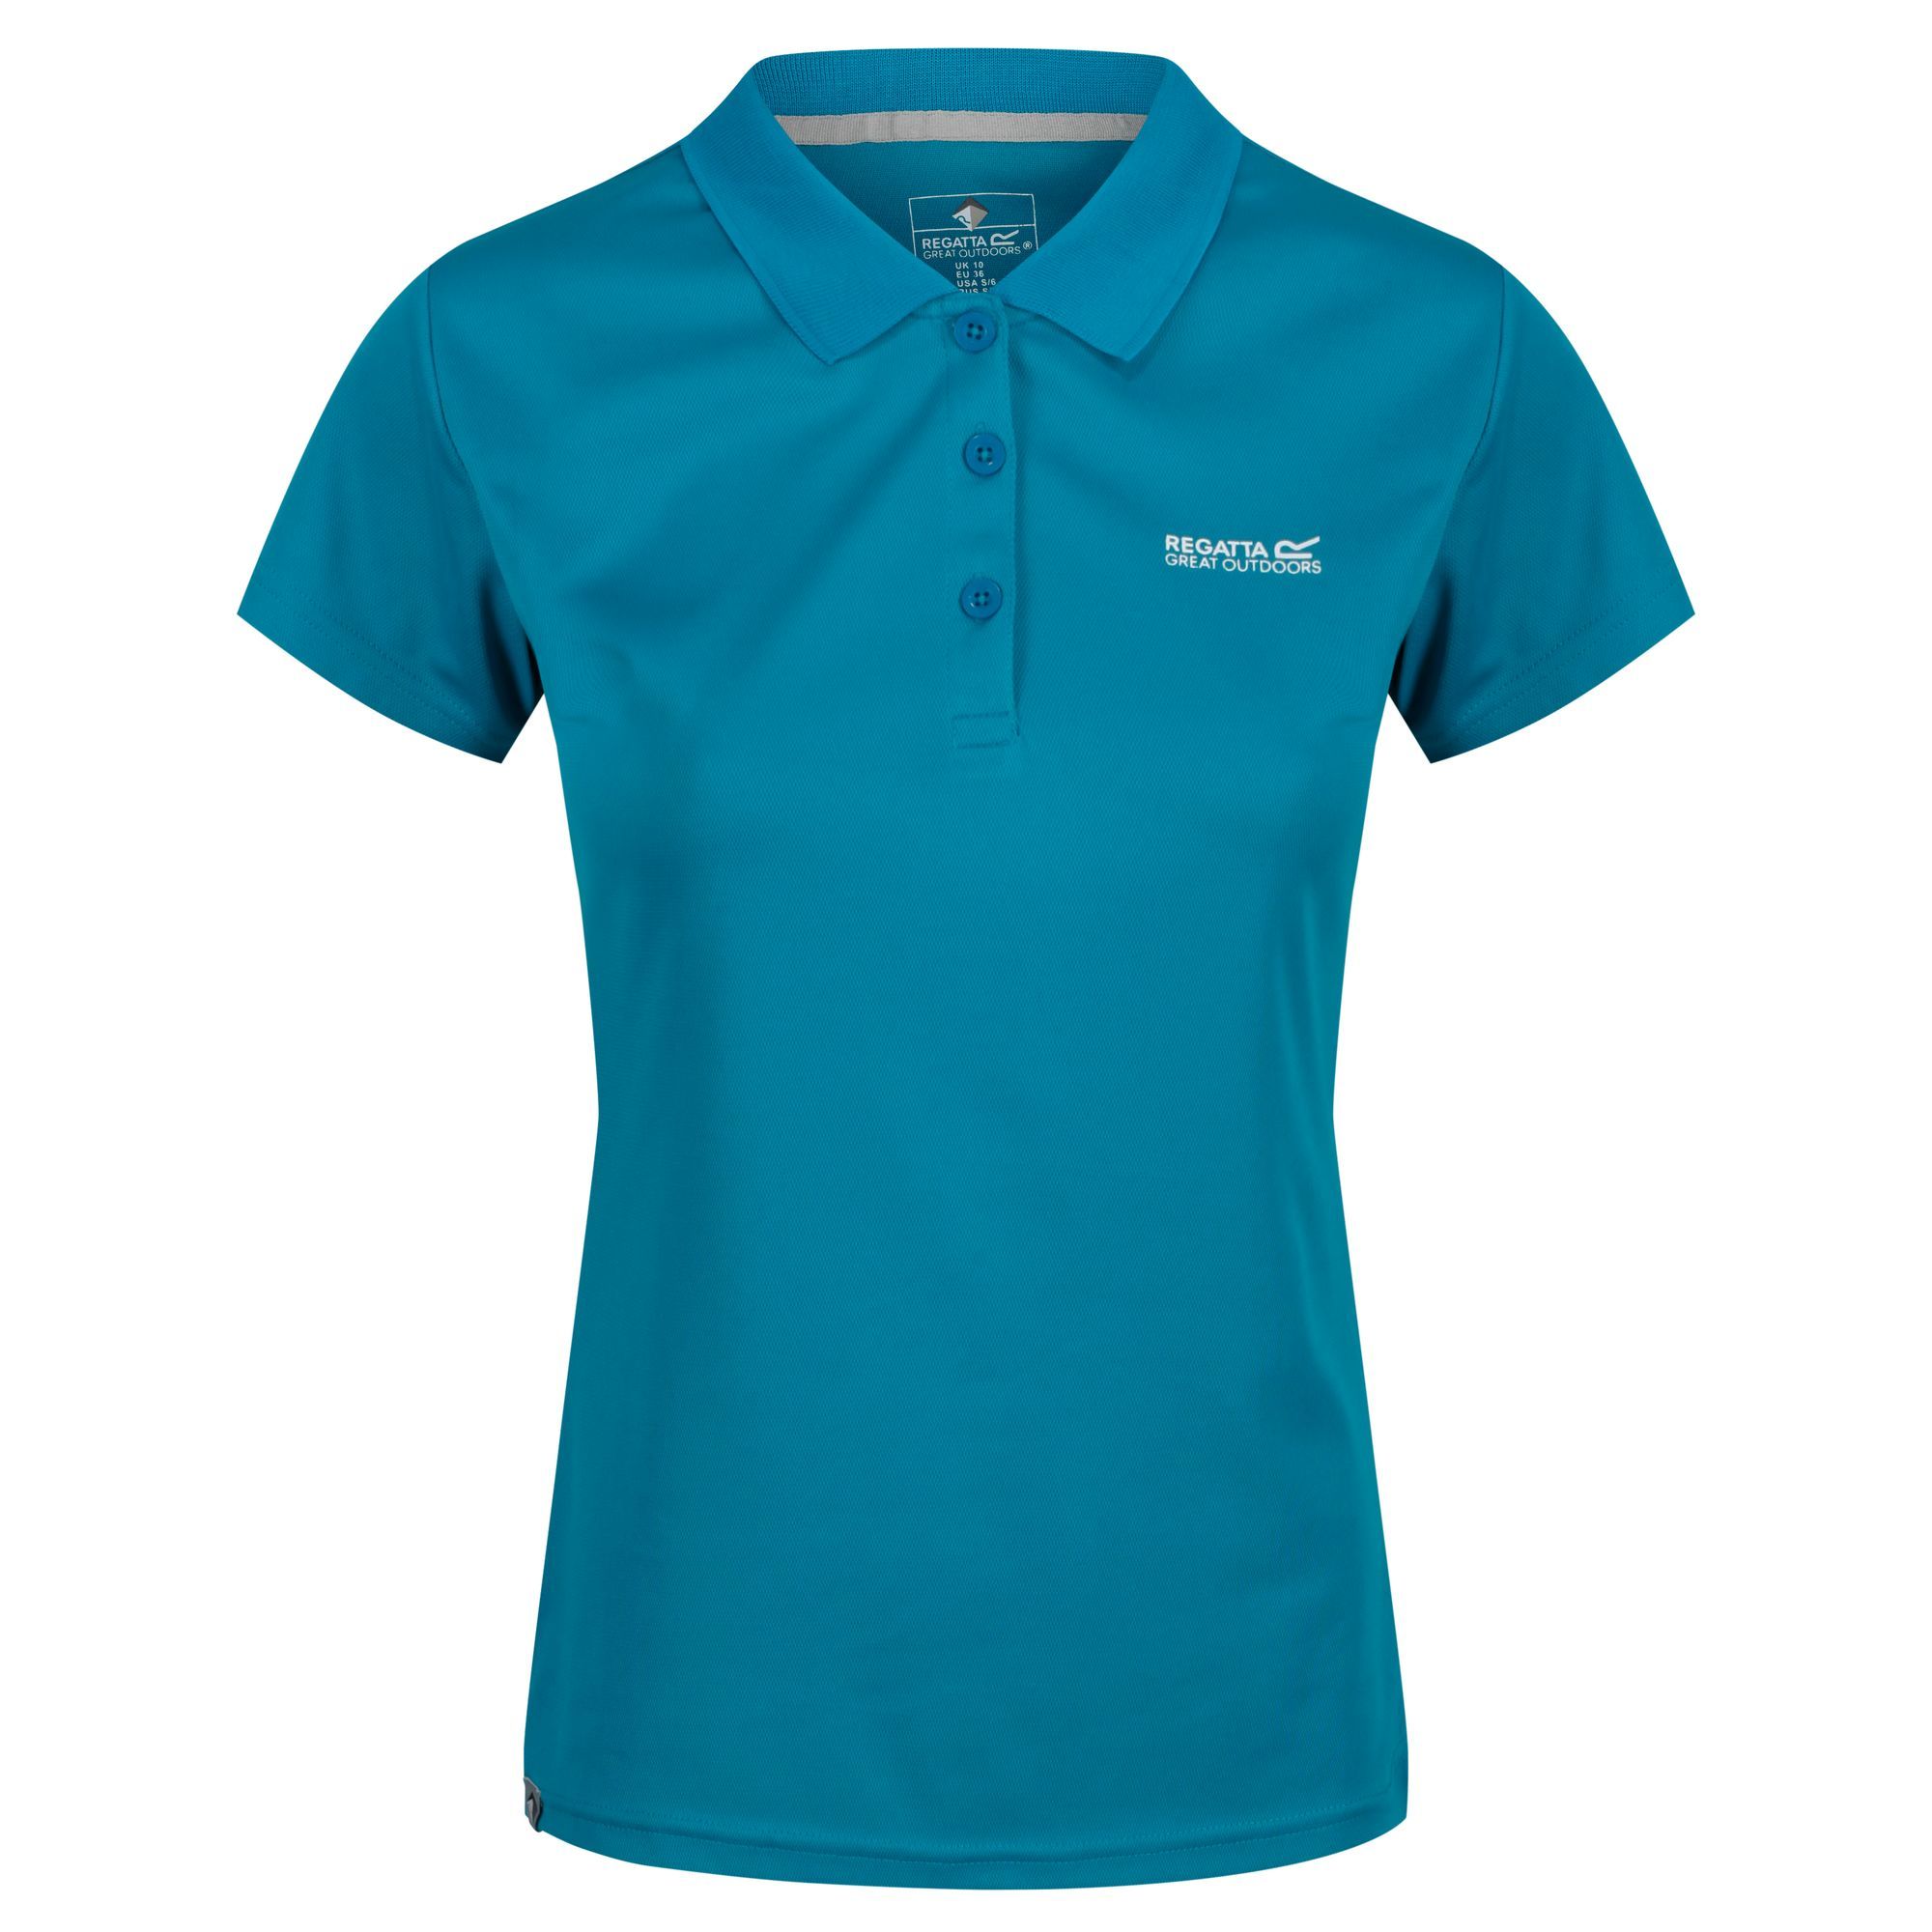 100% Polyester. Maverik short sleeve technical polo shirt. Quick drying. Classic three button fastening and lightly ribbed collar and cuffs.